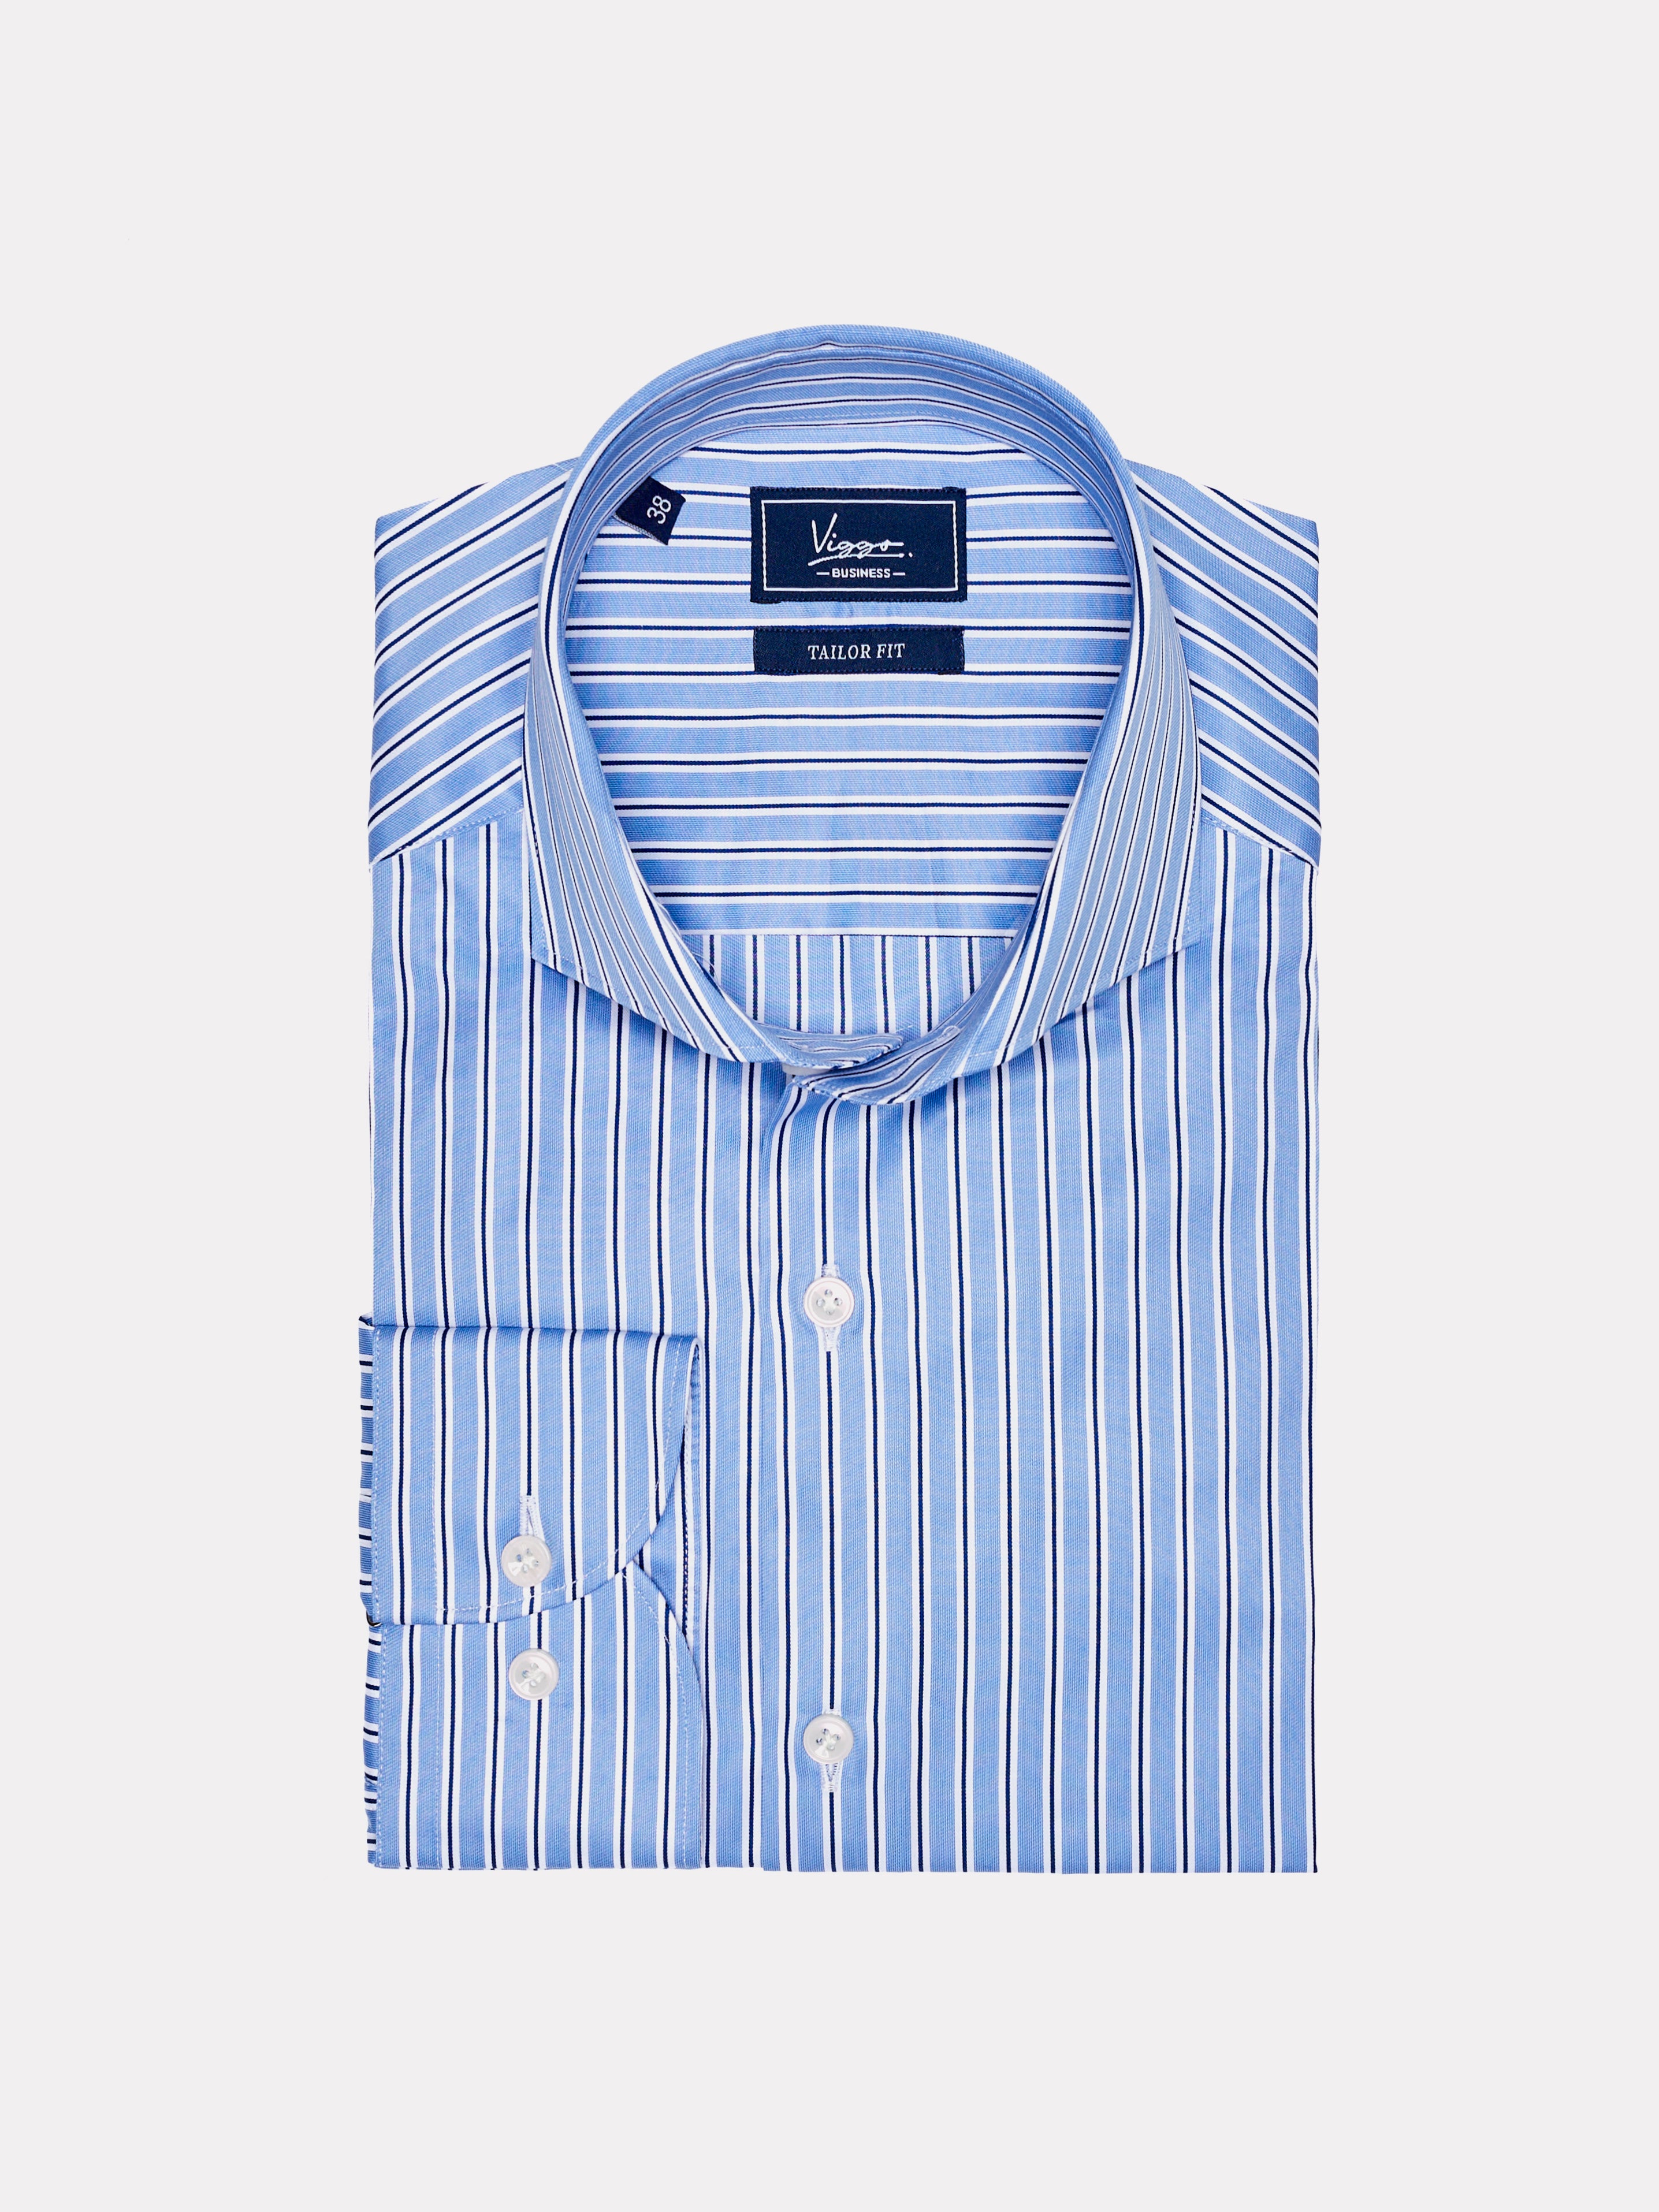 Blue shirt with white and navy stripes